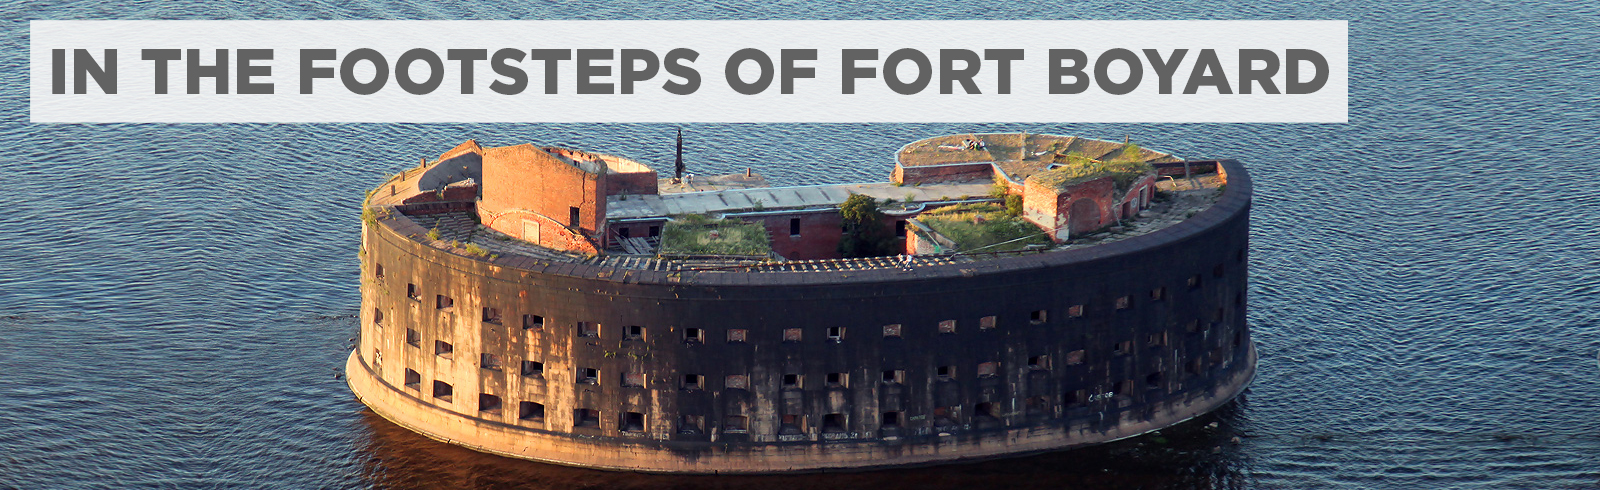 In the Footsteps of Fort Boyard Trail